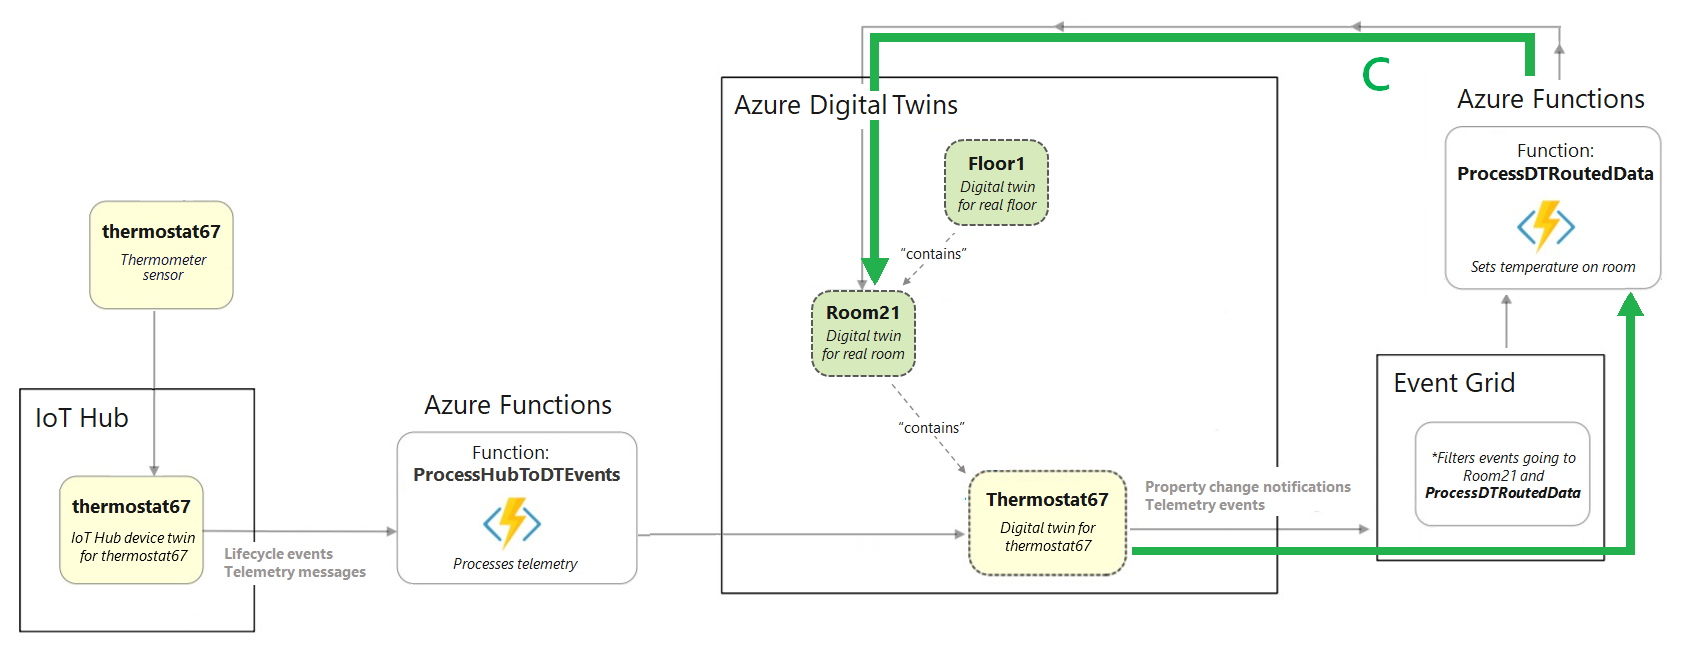 Diagram of an excerpt from the full building scenario diagram highlighting the section that shows the elements after Azure Digital Twins.